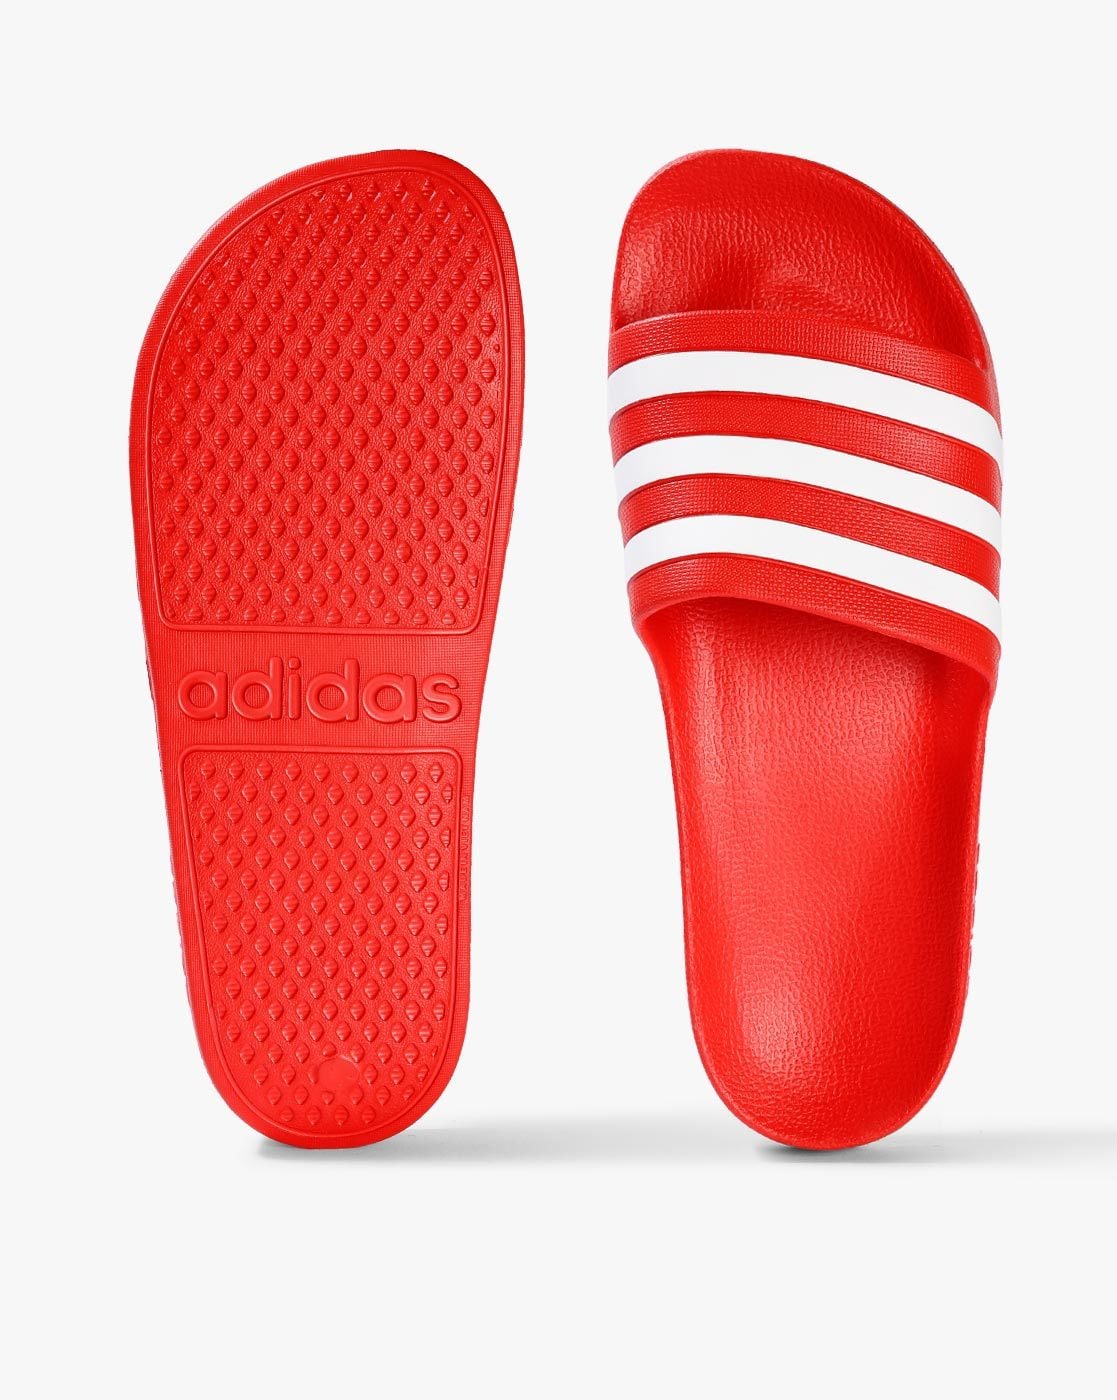 where can i buy adidas slides